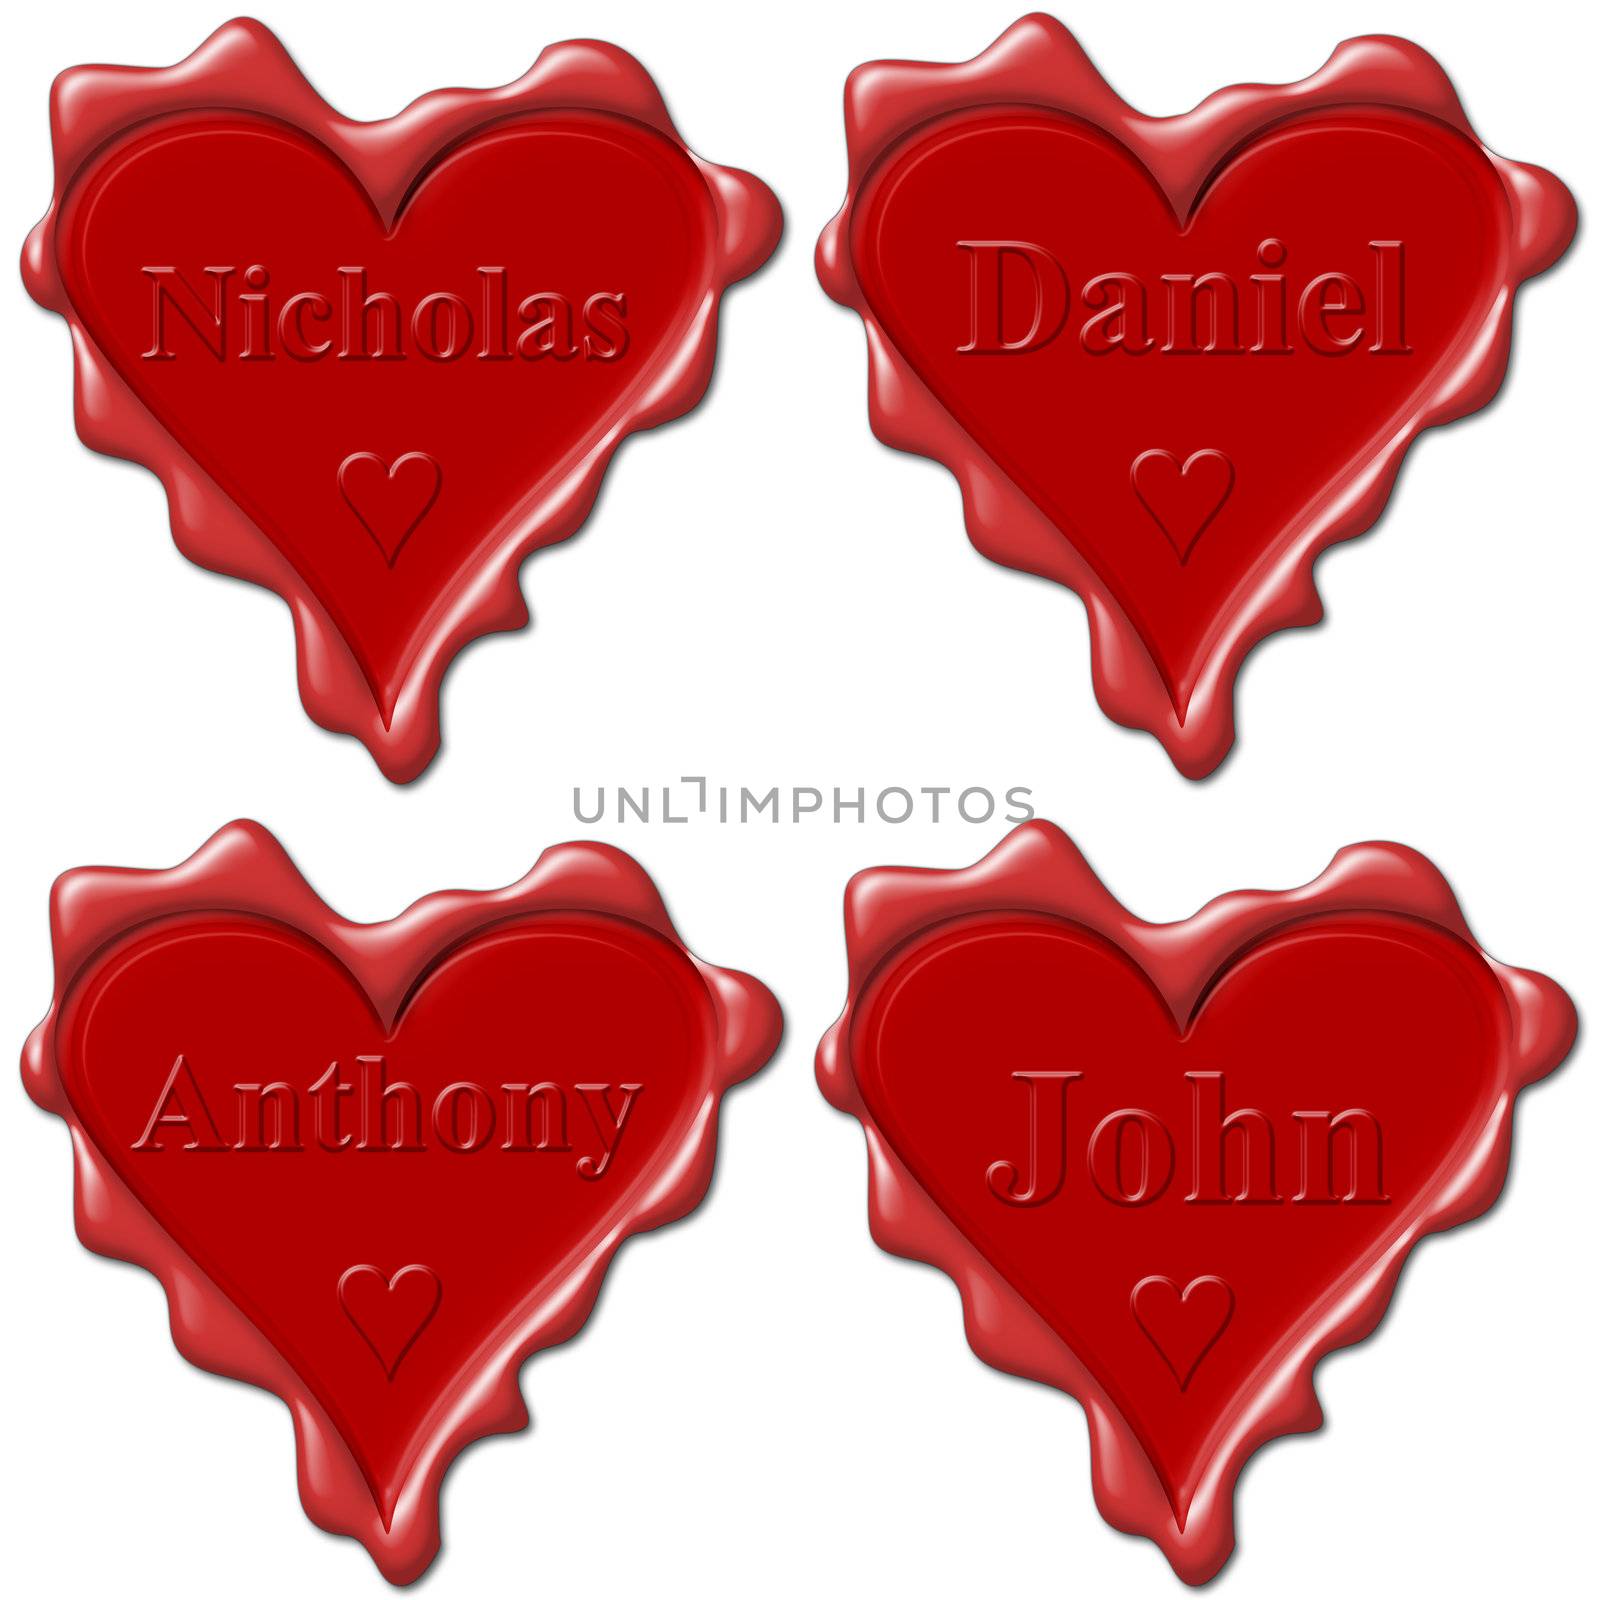 Valentine love hearts with names: Nicholas, Daniel, Anthony, Joh by mozzyb